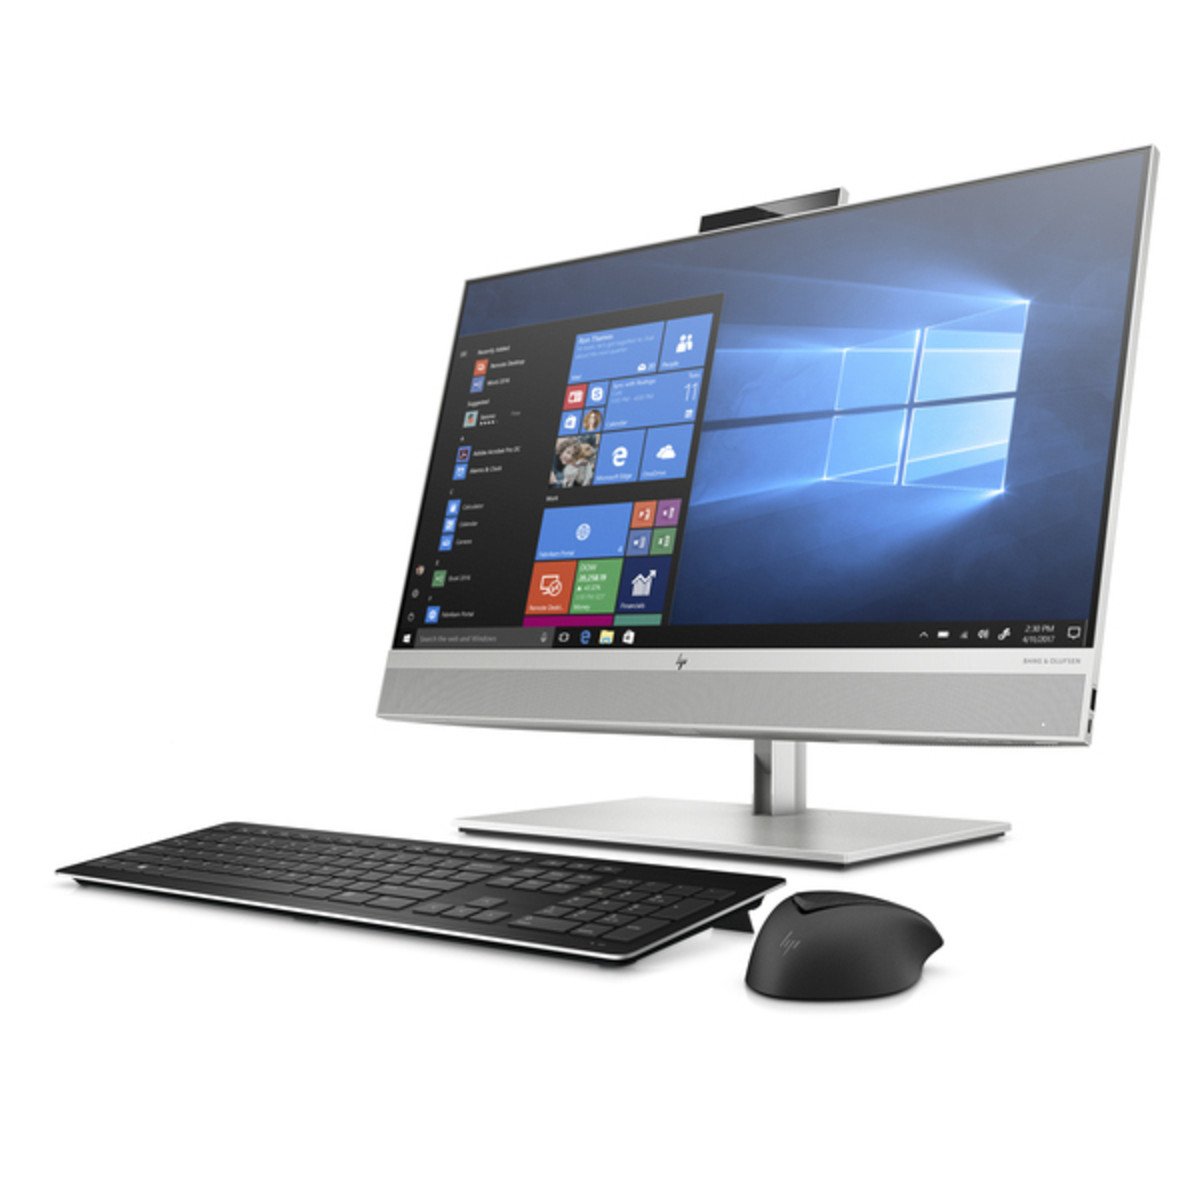 HP EliteOne 800 G6 27 Inch i5-10500 4.5GHz 8GB RAM 256GB SSD All-in-One Desktop with Windows 10 Home